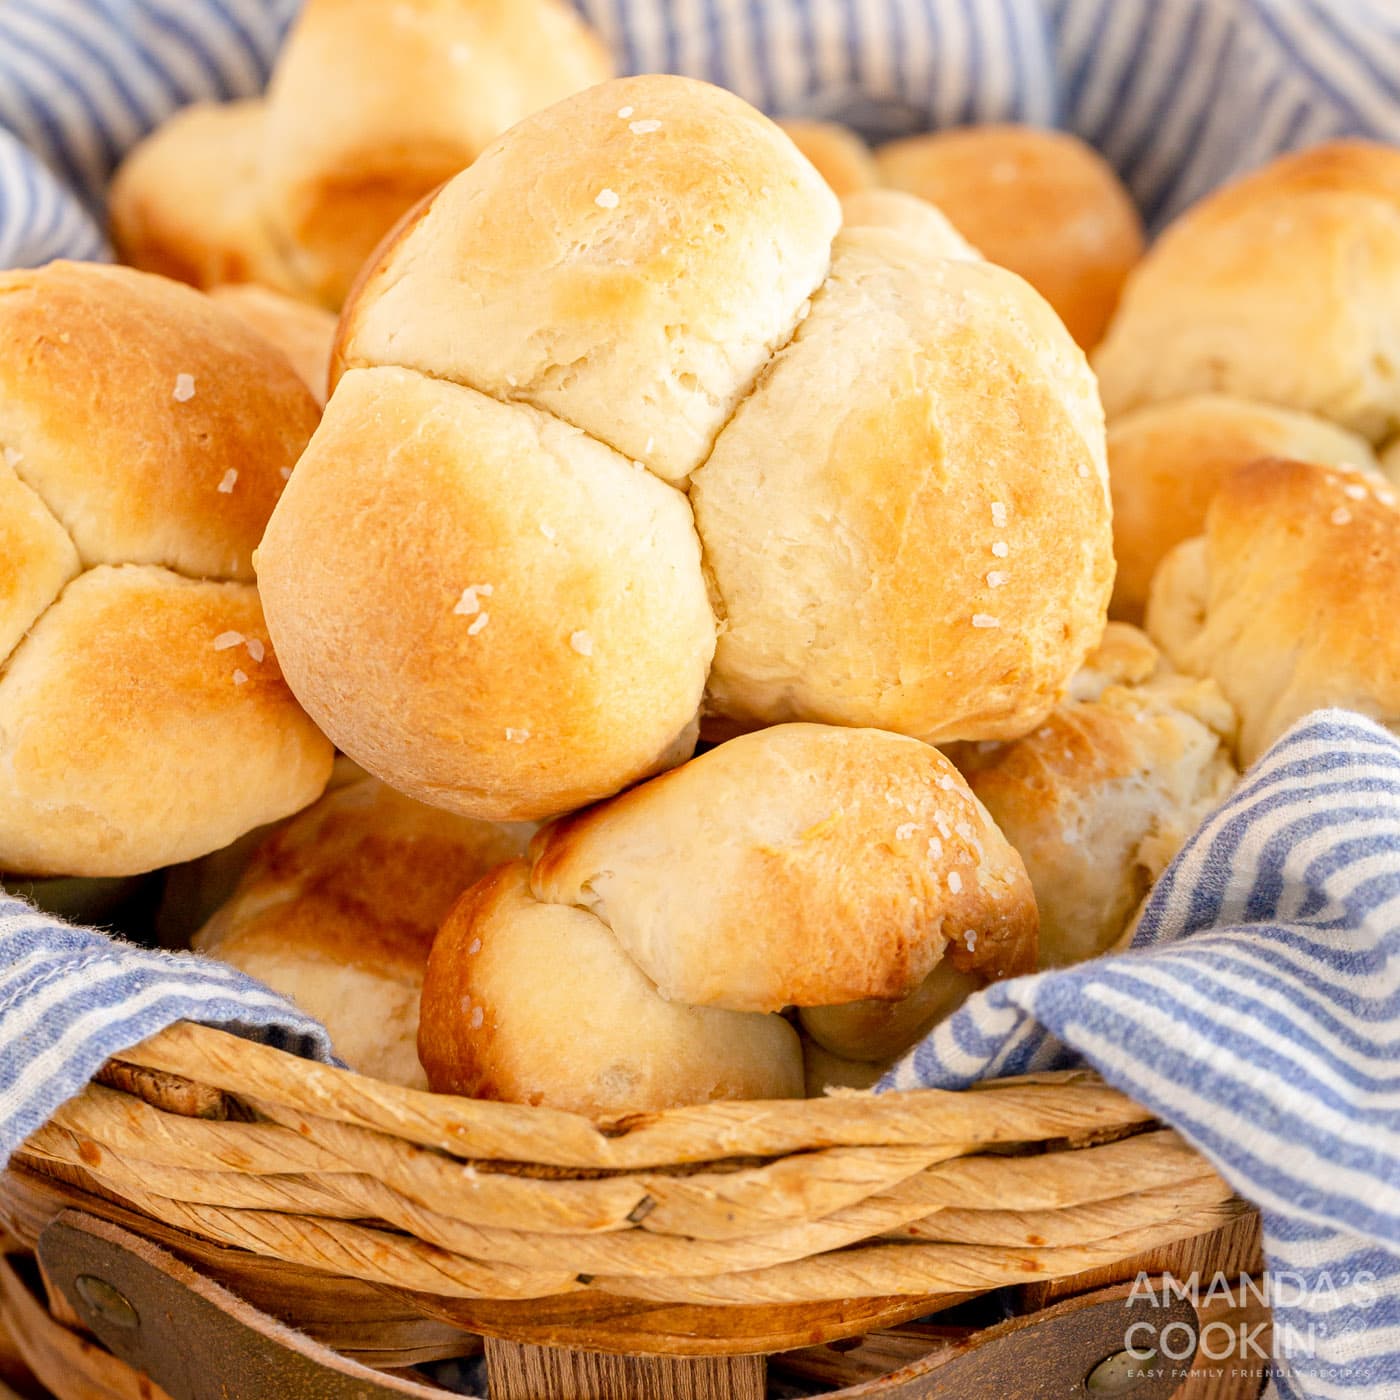 images of bread rolls